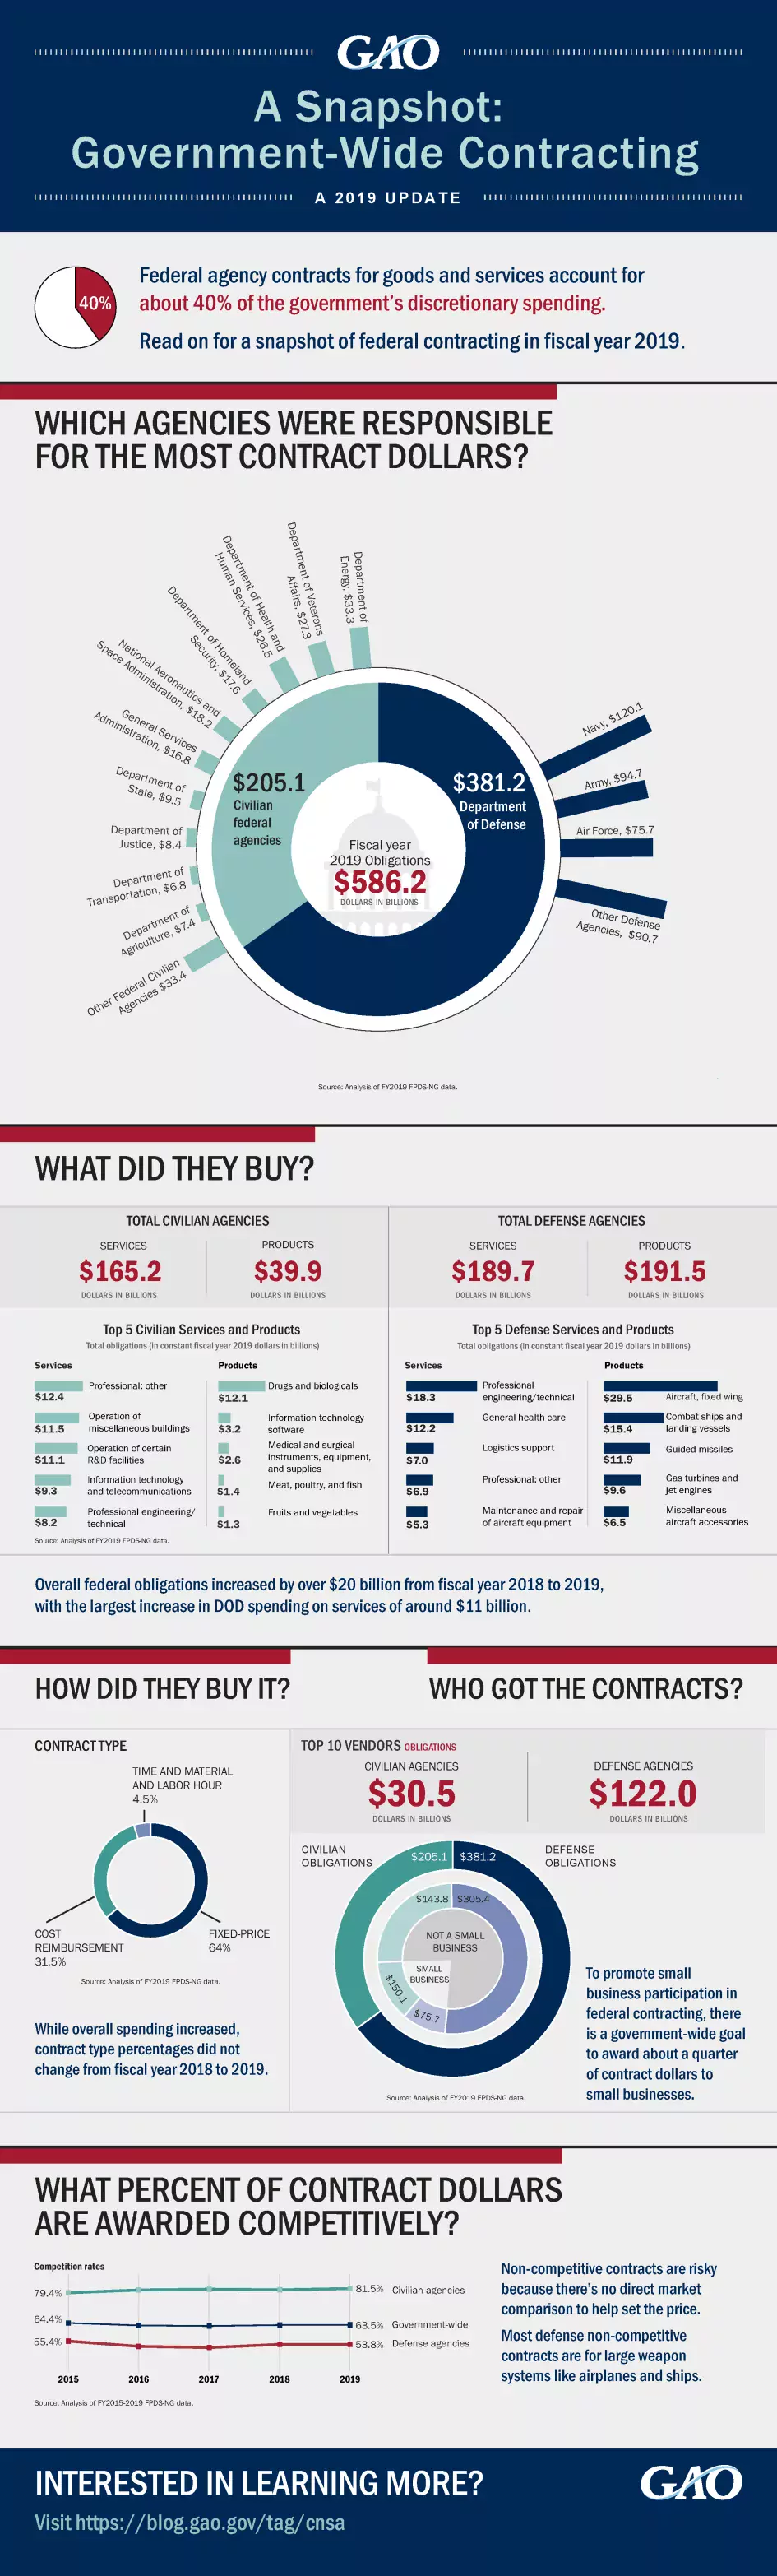 Infographic showing governmentwide spending on goods and services in FY 2019